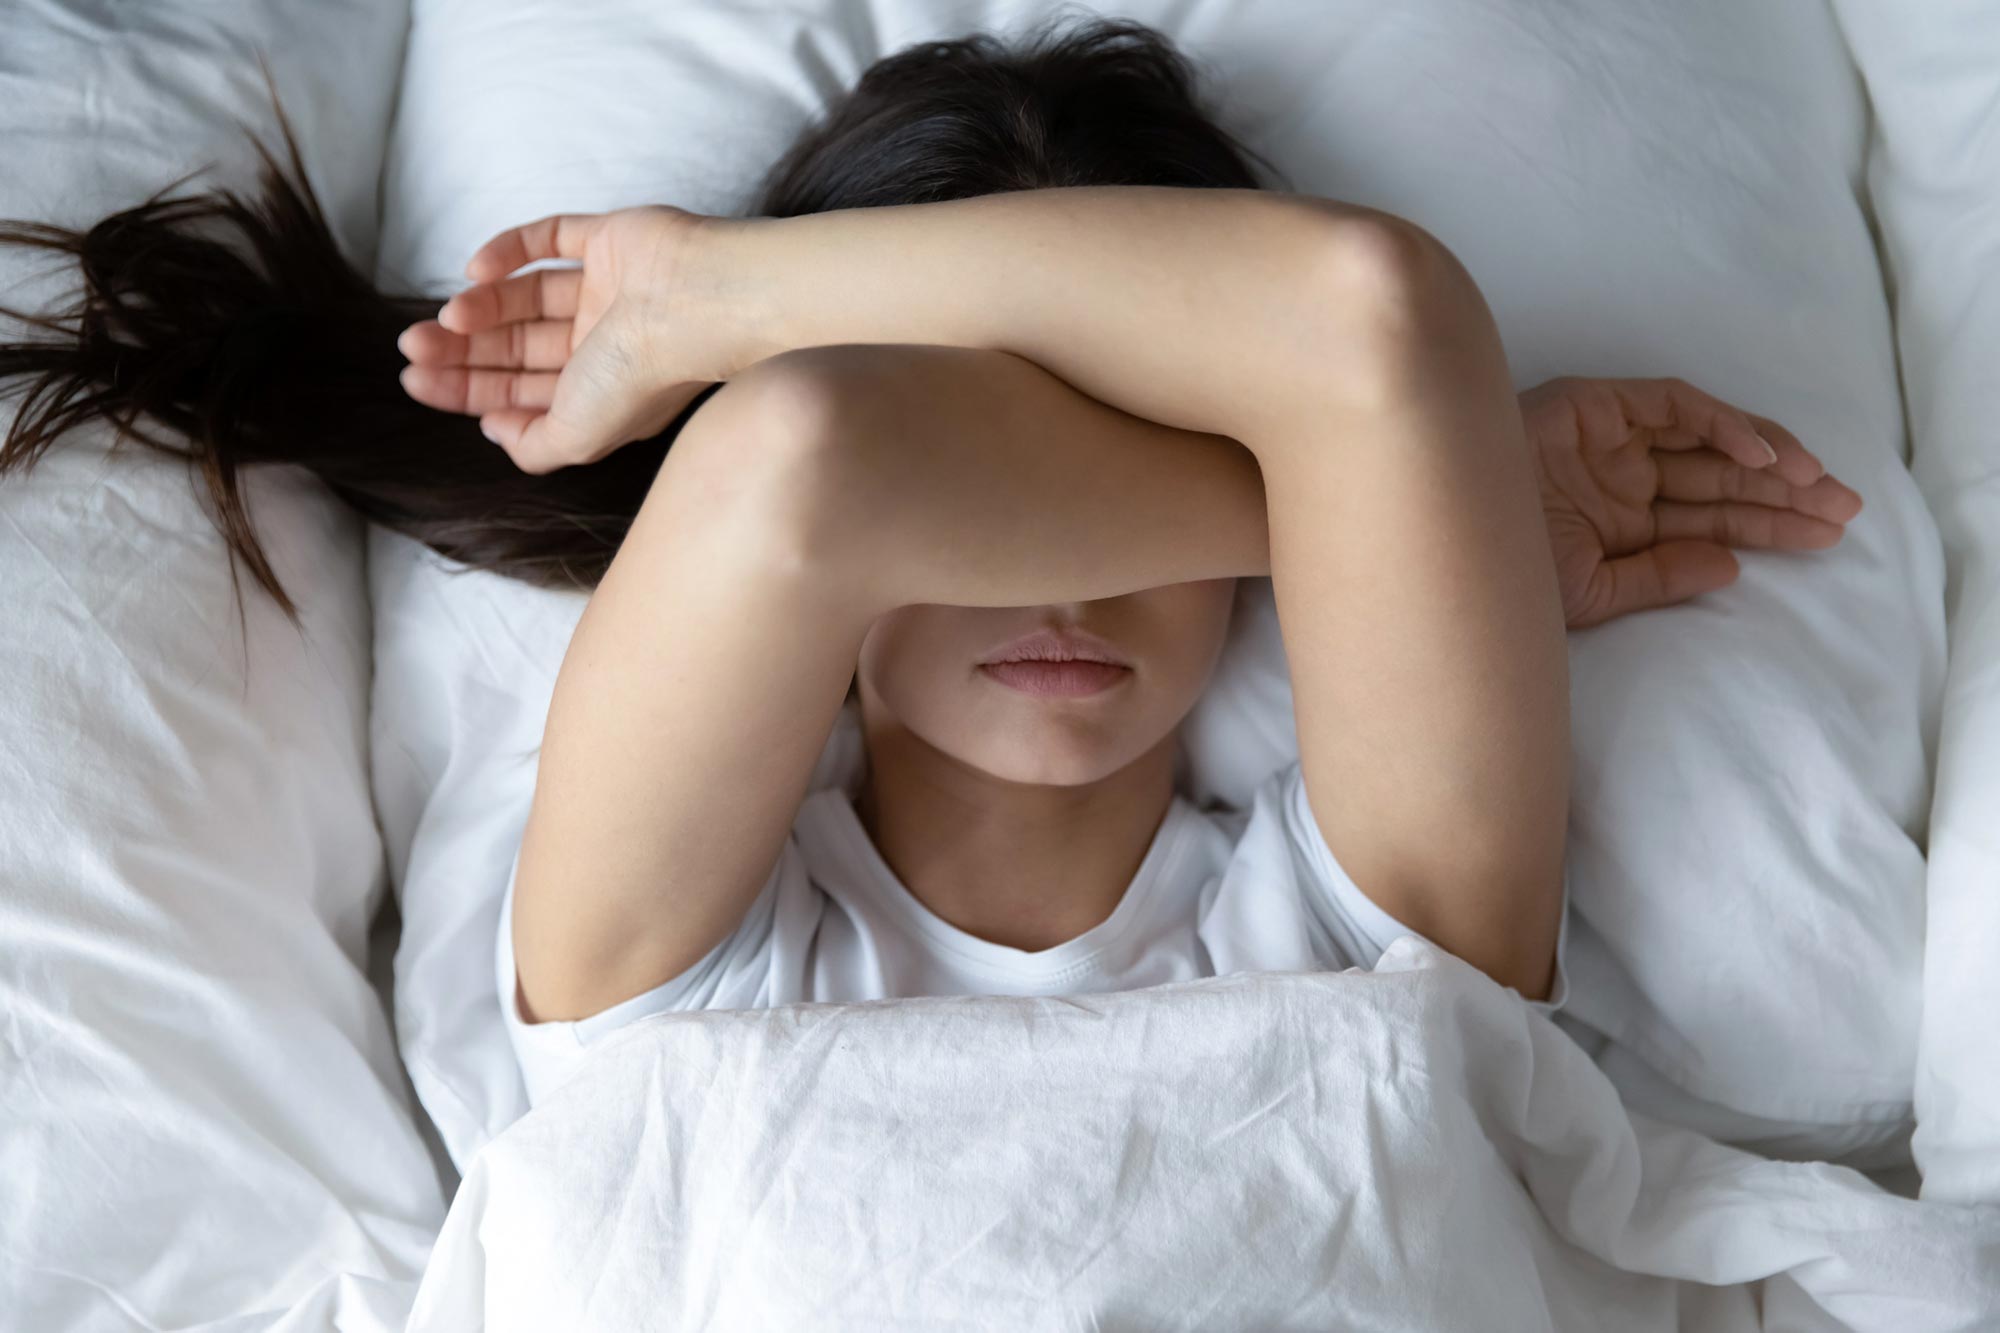 Turn Off Your Night Light: Keeping Any Light on While Sleeping Is Linked to Obesity, Diabetes, and High Blood Pressure